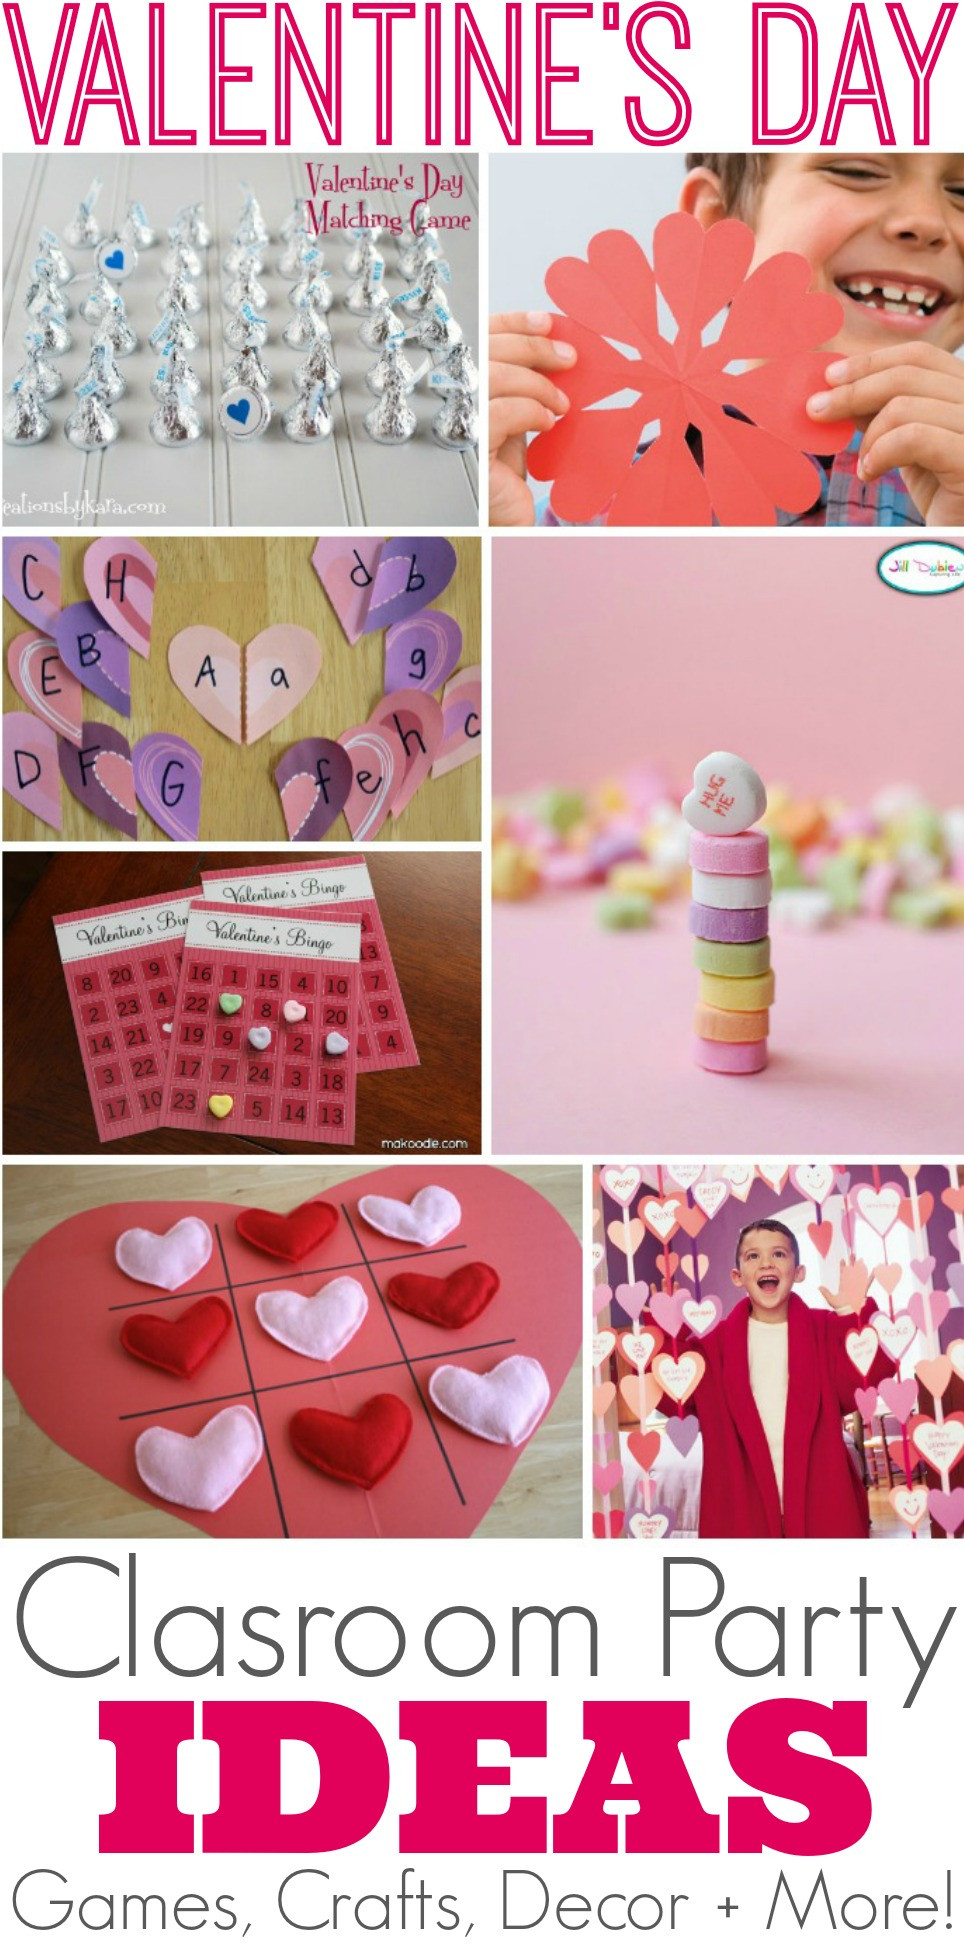 Valentines Day School Party Ideas
 25 Creative Valentine s Day Class Party Ideas